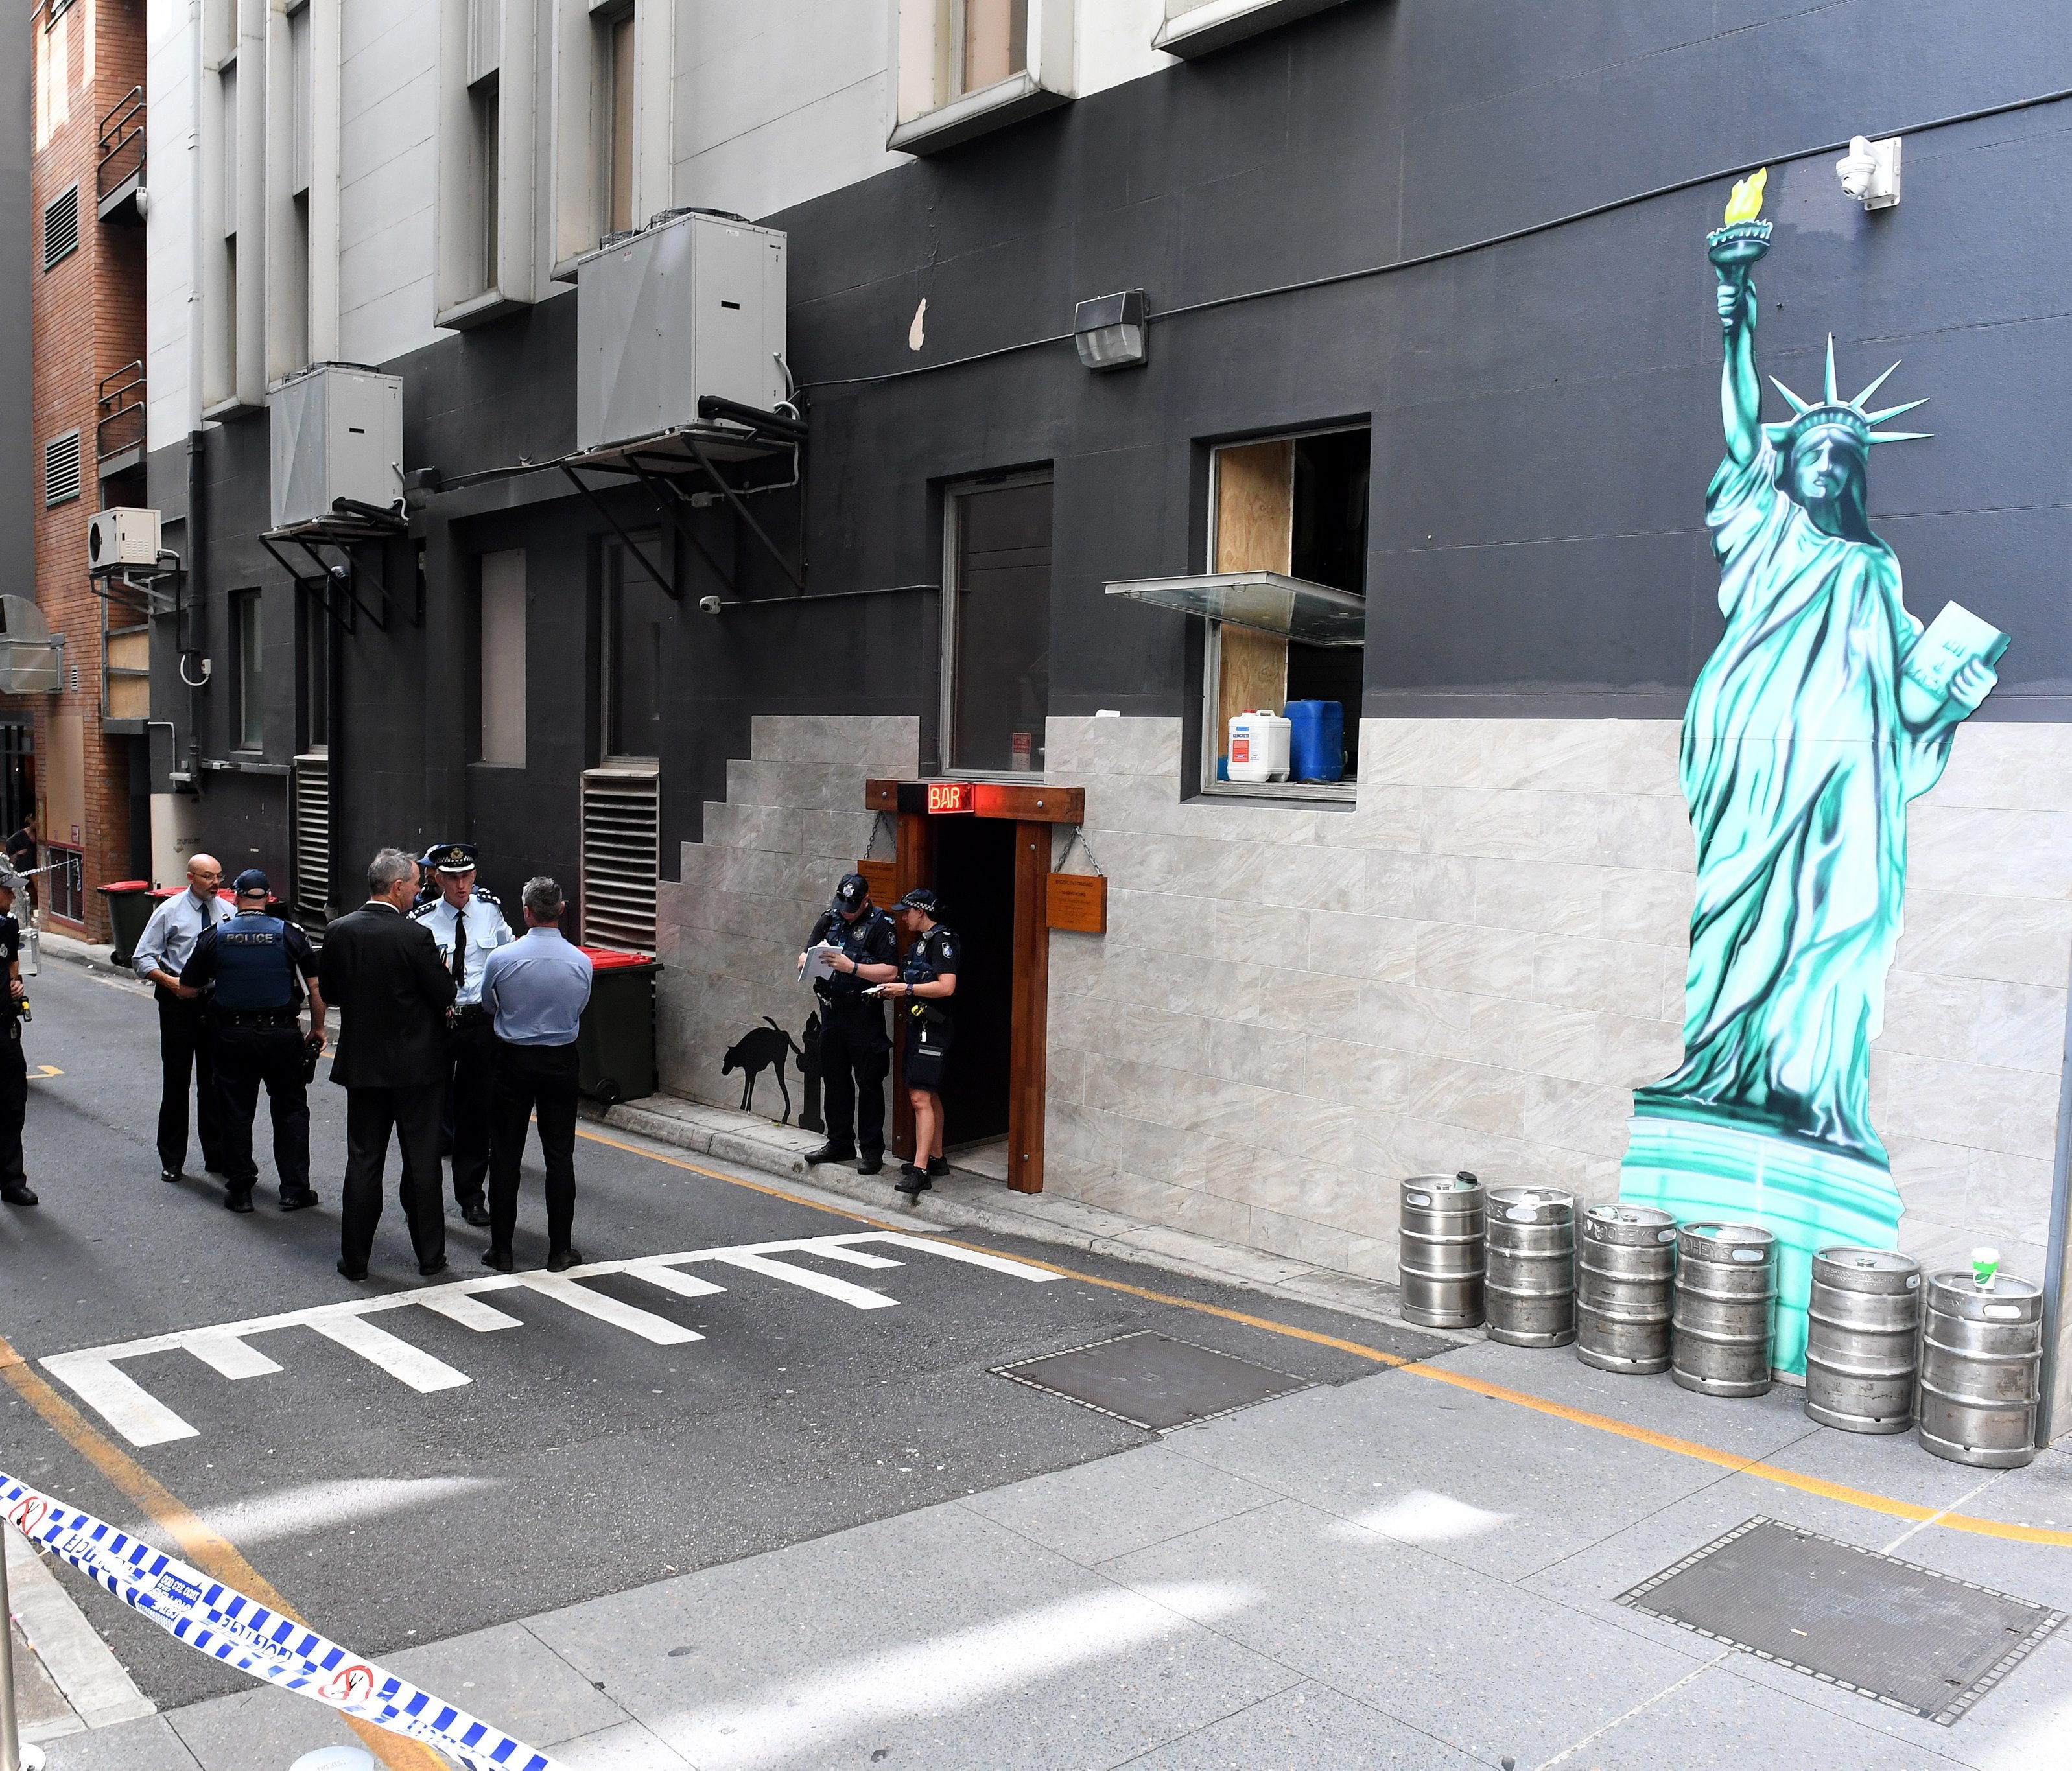 Police officers are seen at a cordoned off area after a man was accidentally shot in Eagle Lane in Brisbane's central business district, Queensland, Australia, Jan. 23, 2017.